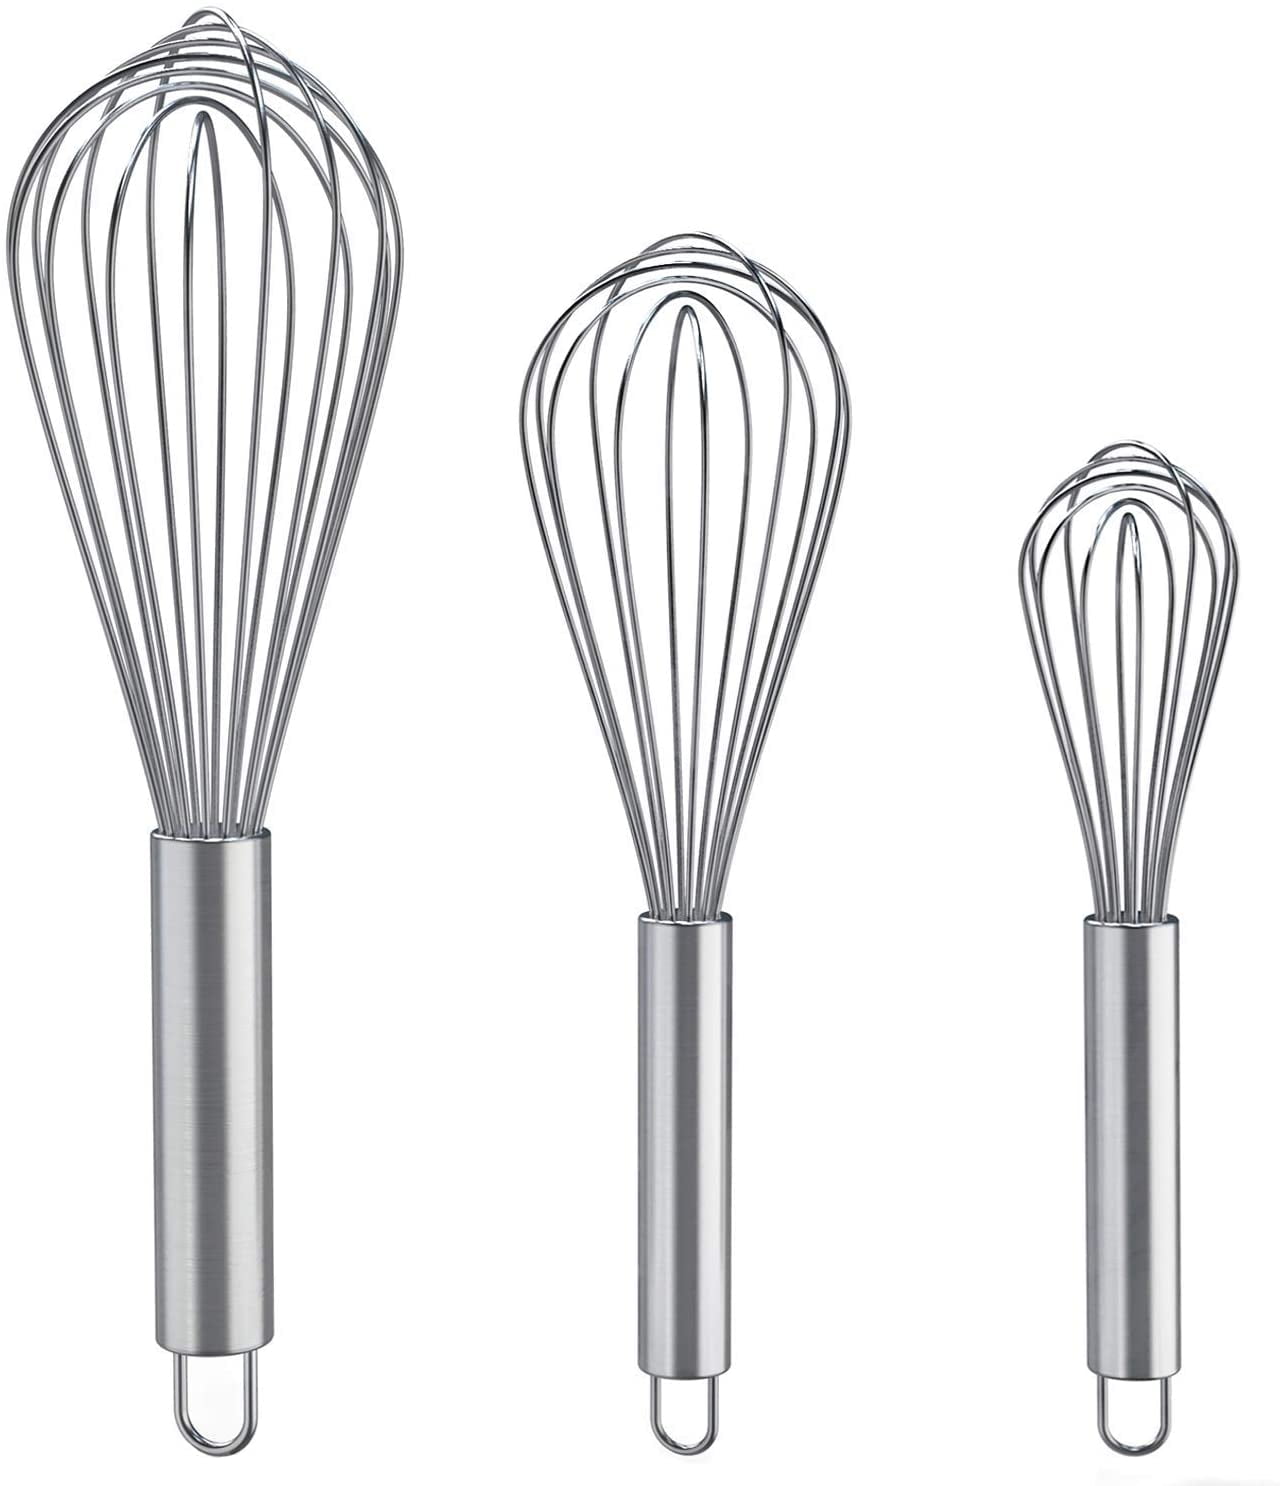 FGKEIUX Whisks for Cooking, 2 Pack Stainless Steel Whisk for Blending, Whisking, Beating and Stirring, Enhanced Version Balloon Wire Whisk Set